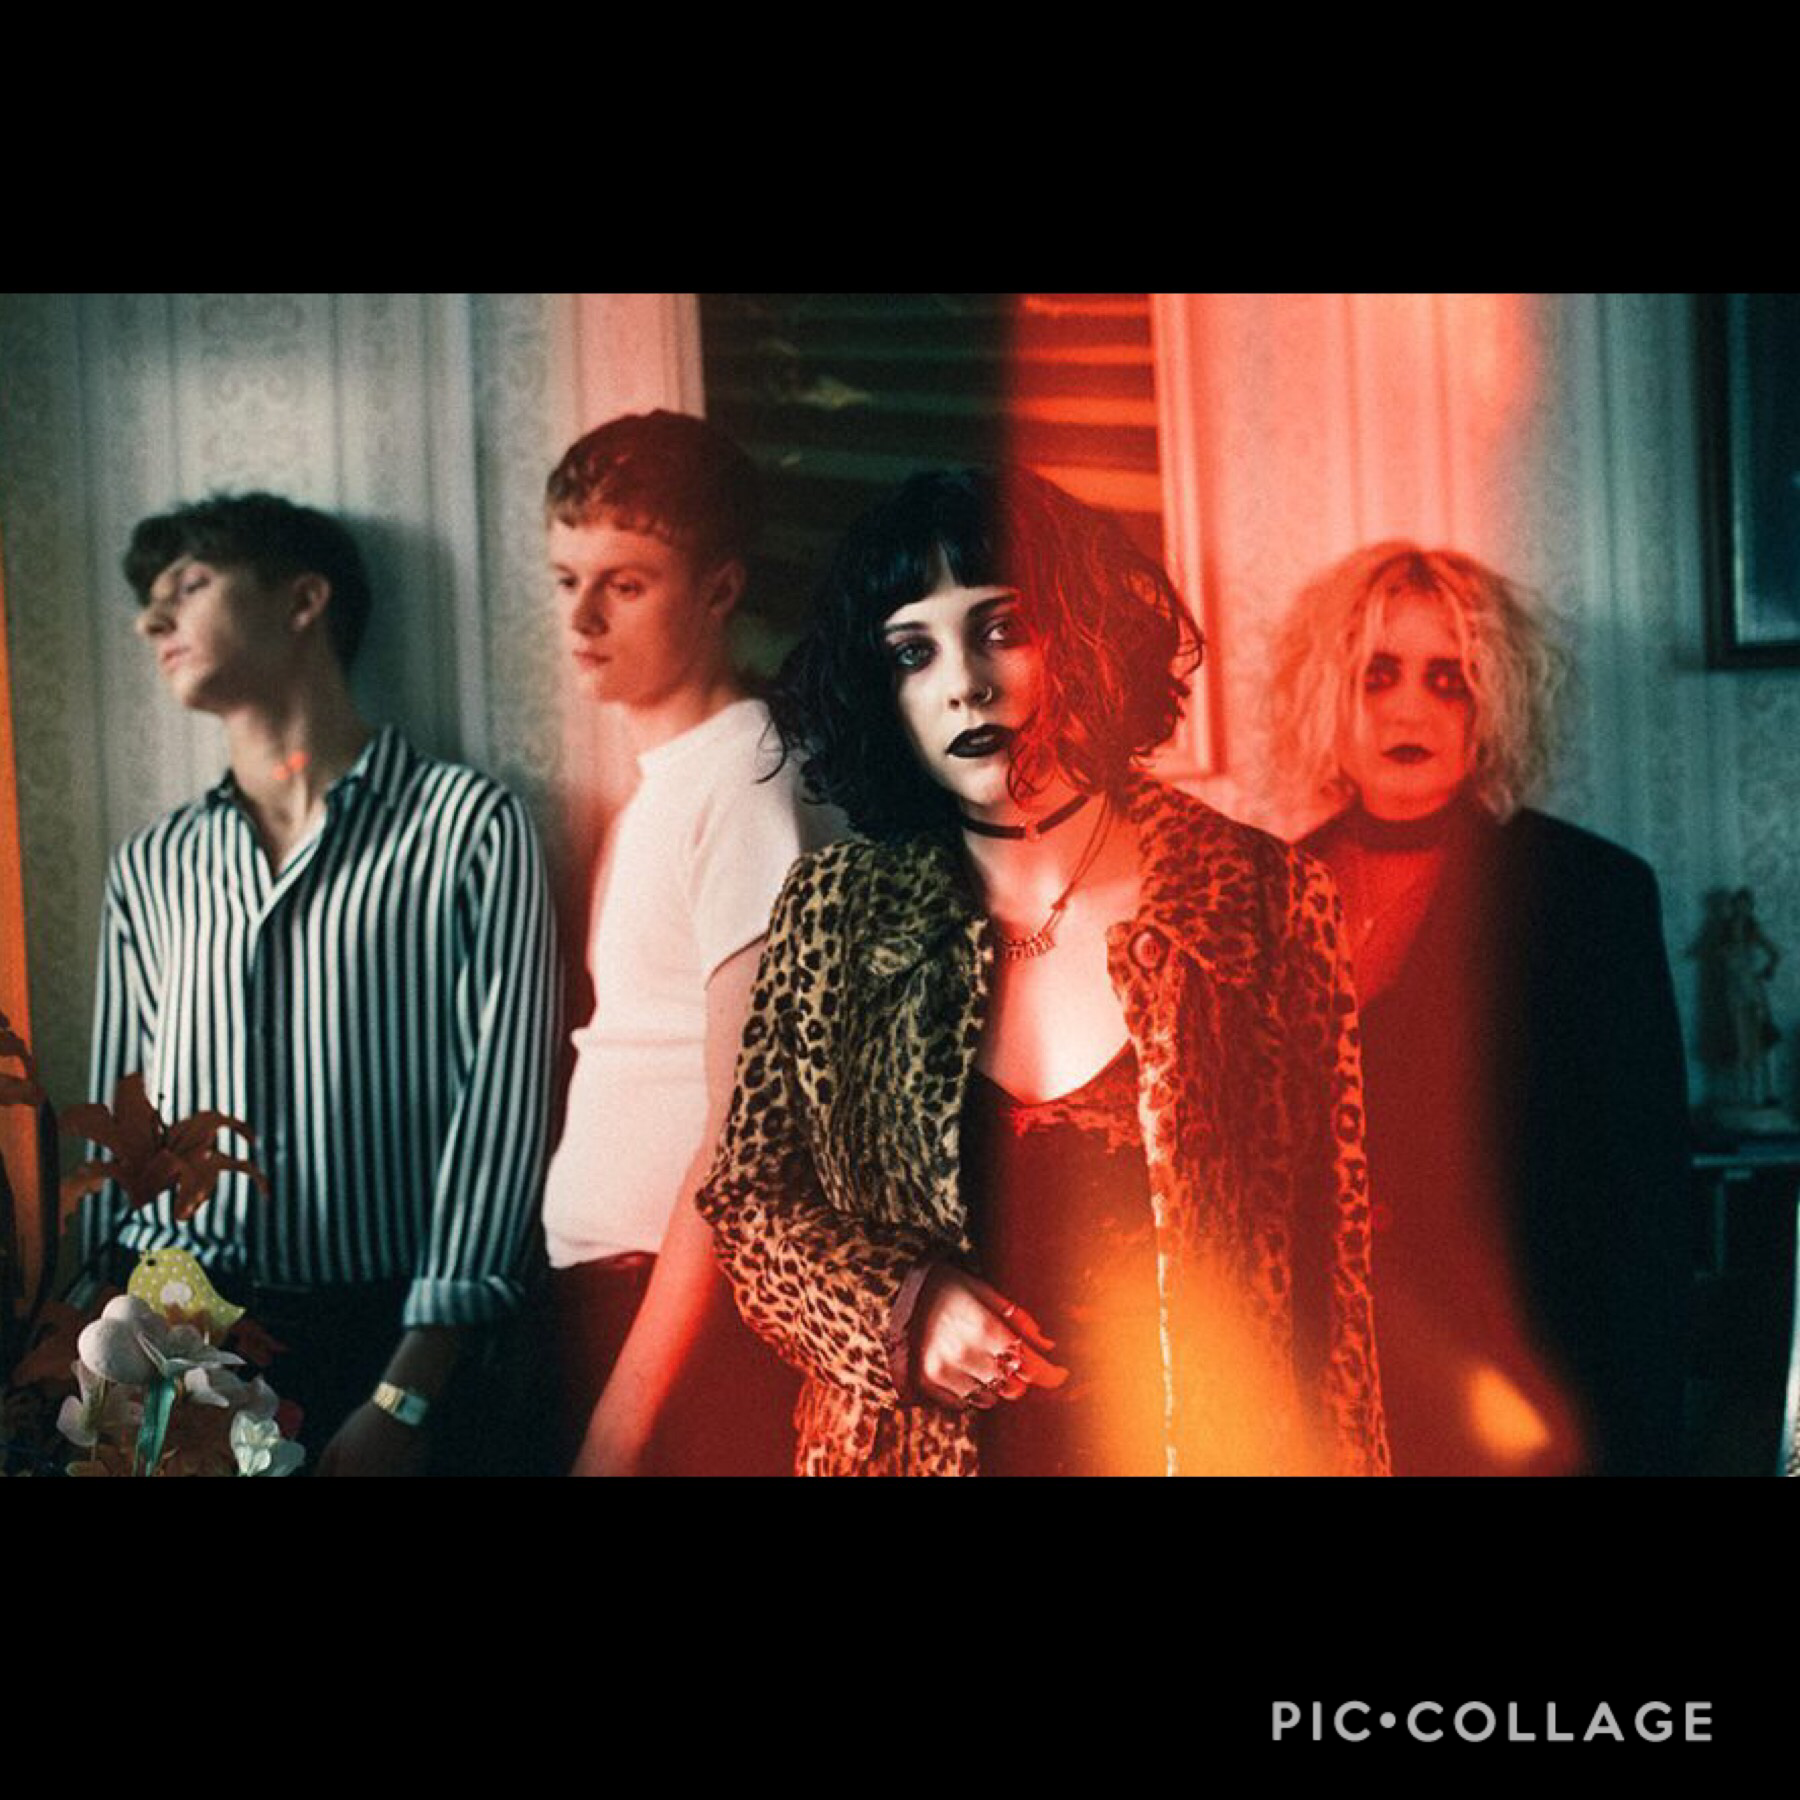 🌊 Ta p p y t a p 🌊 

Issa Pale Waves their music is amazing go check em out. Also I’m bored so if you wanna Rp then hmu. Also I make icons so if ya want one just comment details on what you want 